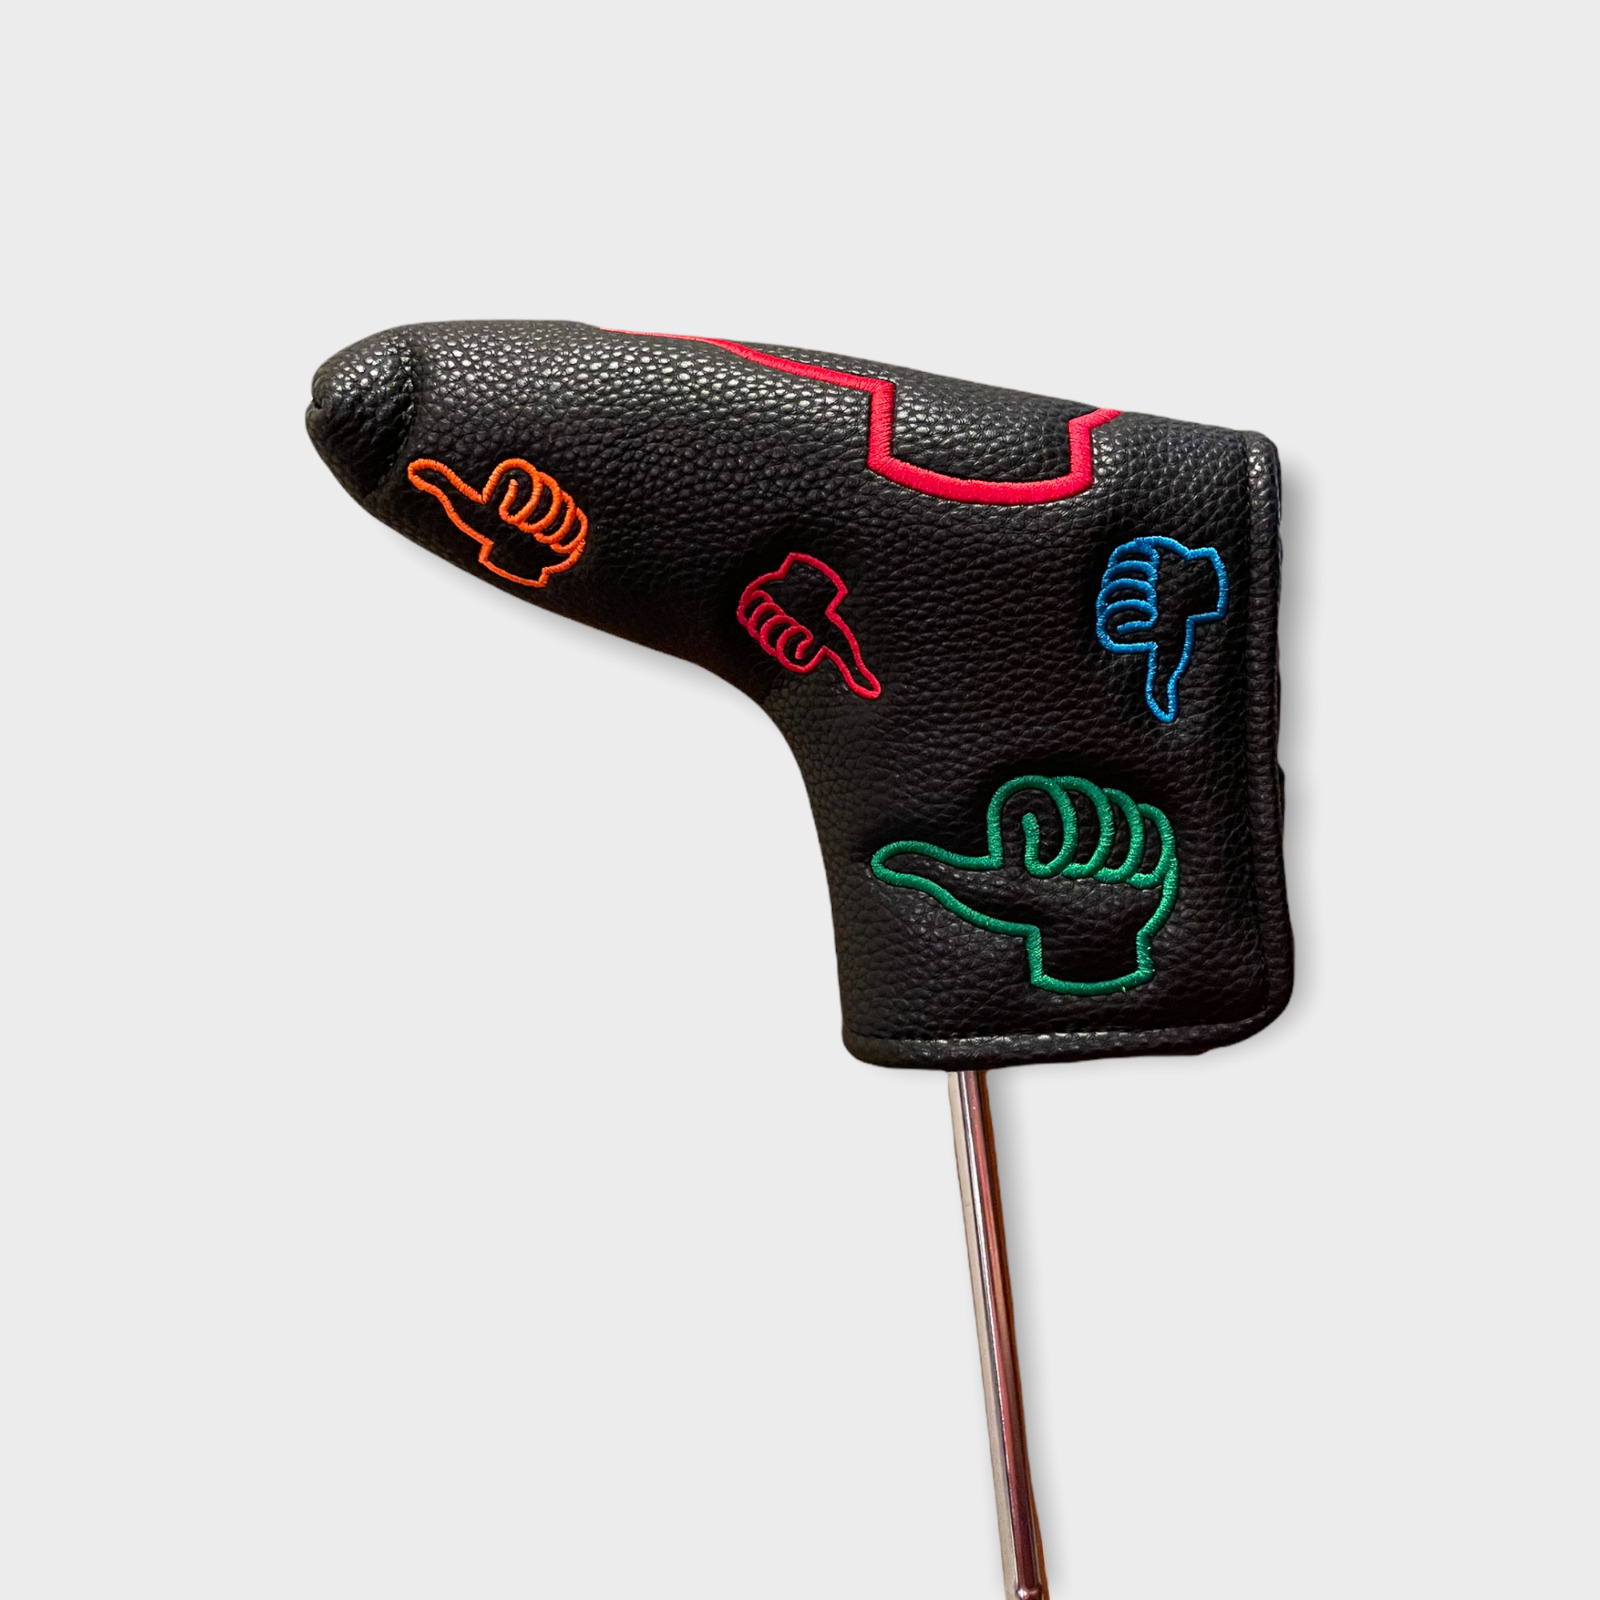 Phill Special Thumbs Up Lucky Putter Cover